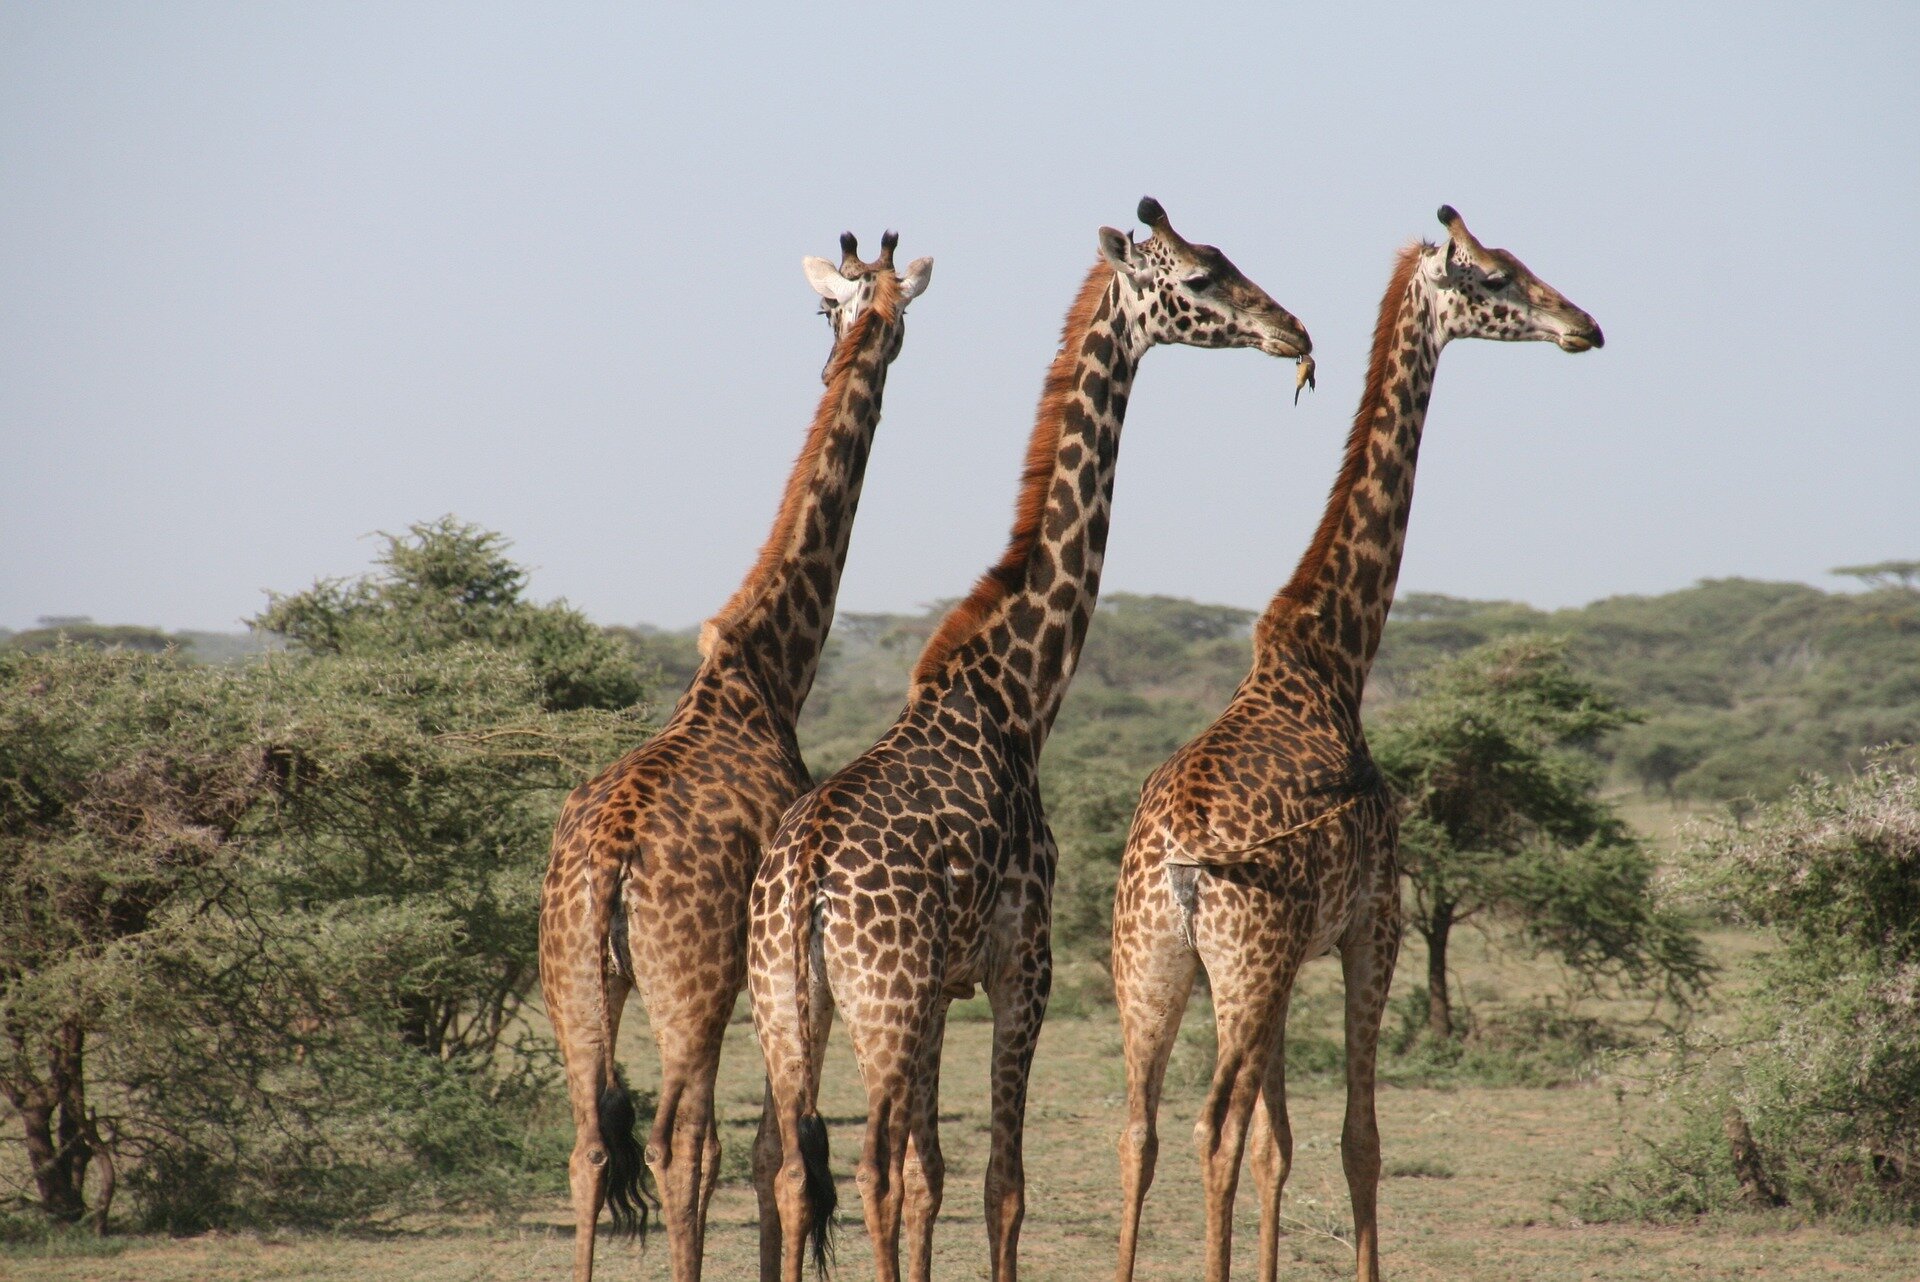 How many giraffe species are there? Understanding this maybe key to their protection